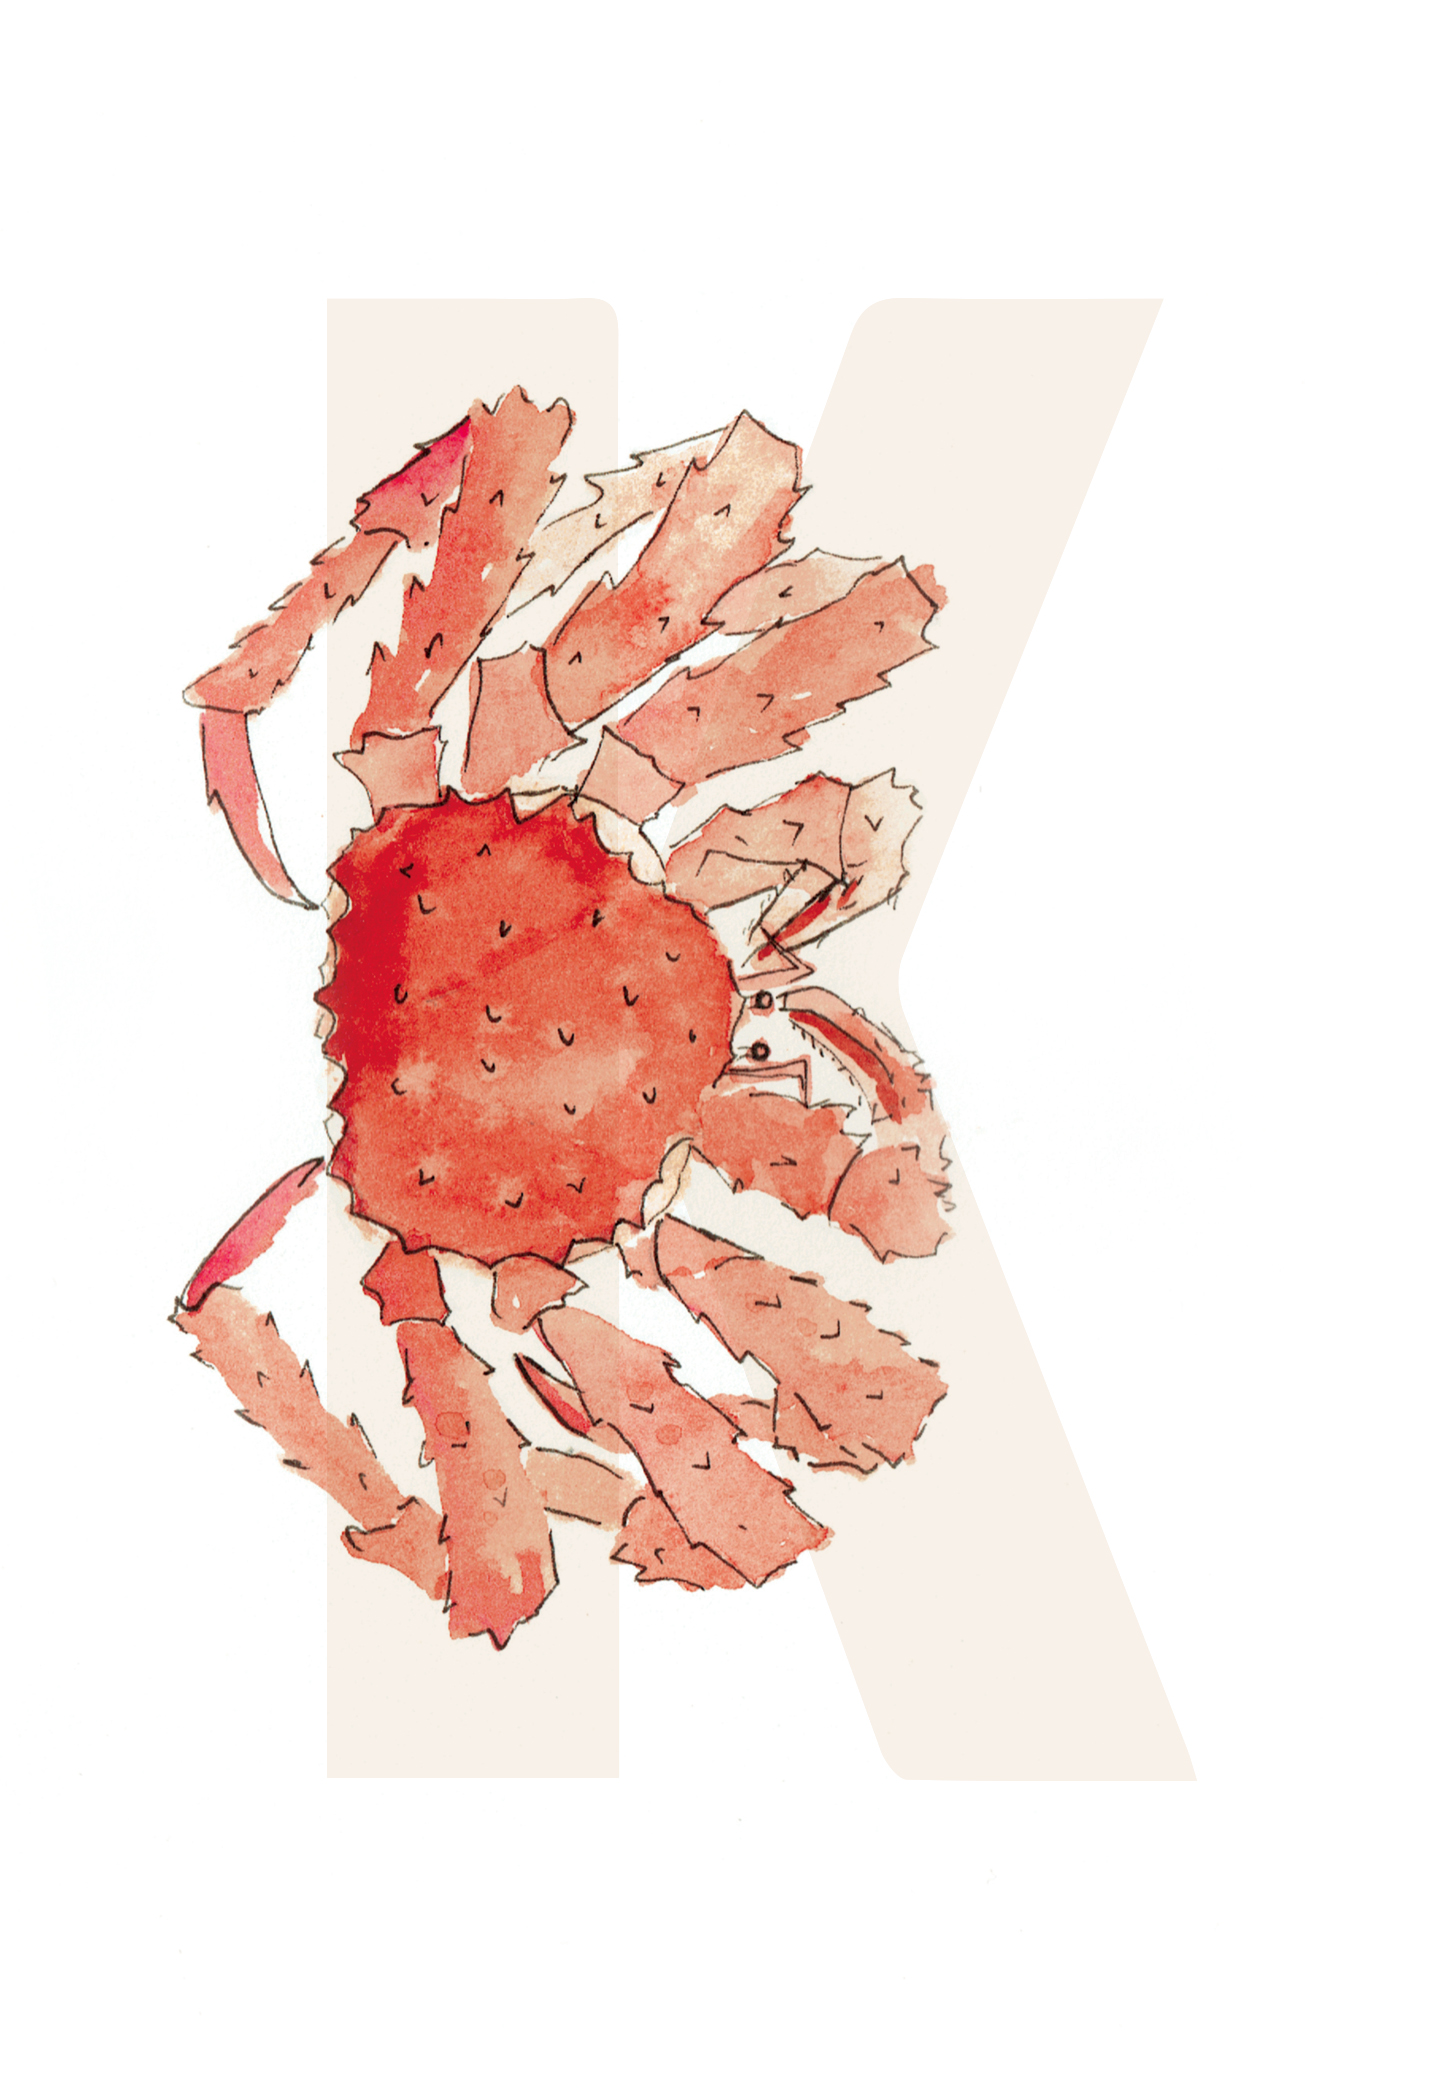 K is for King Crab